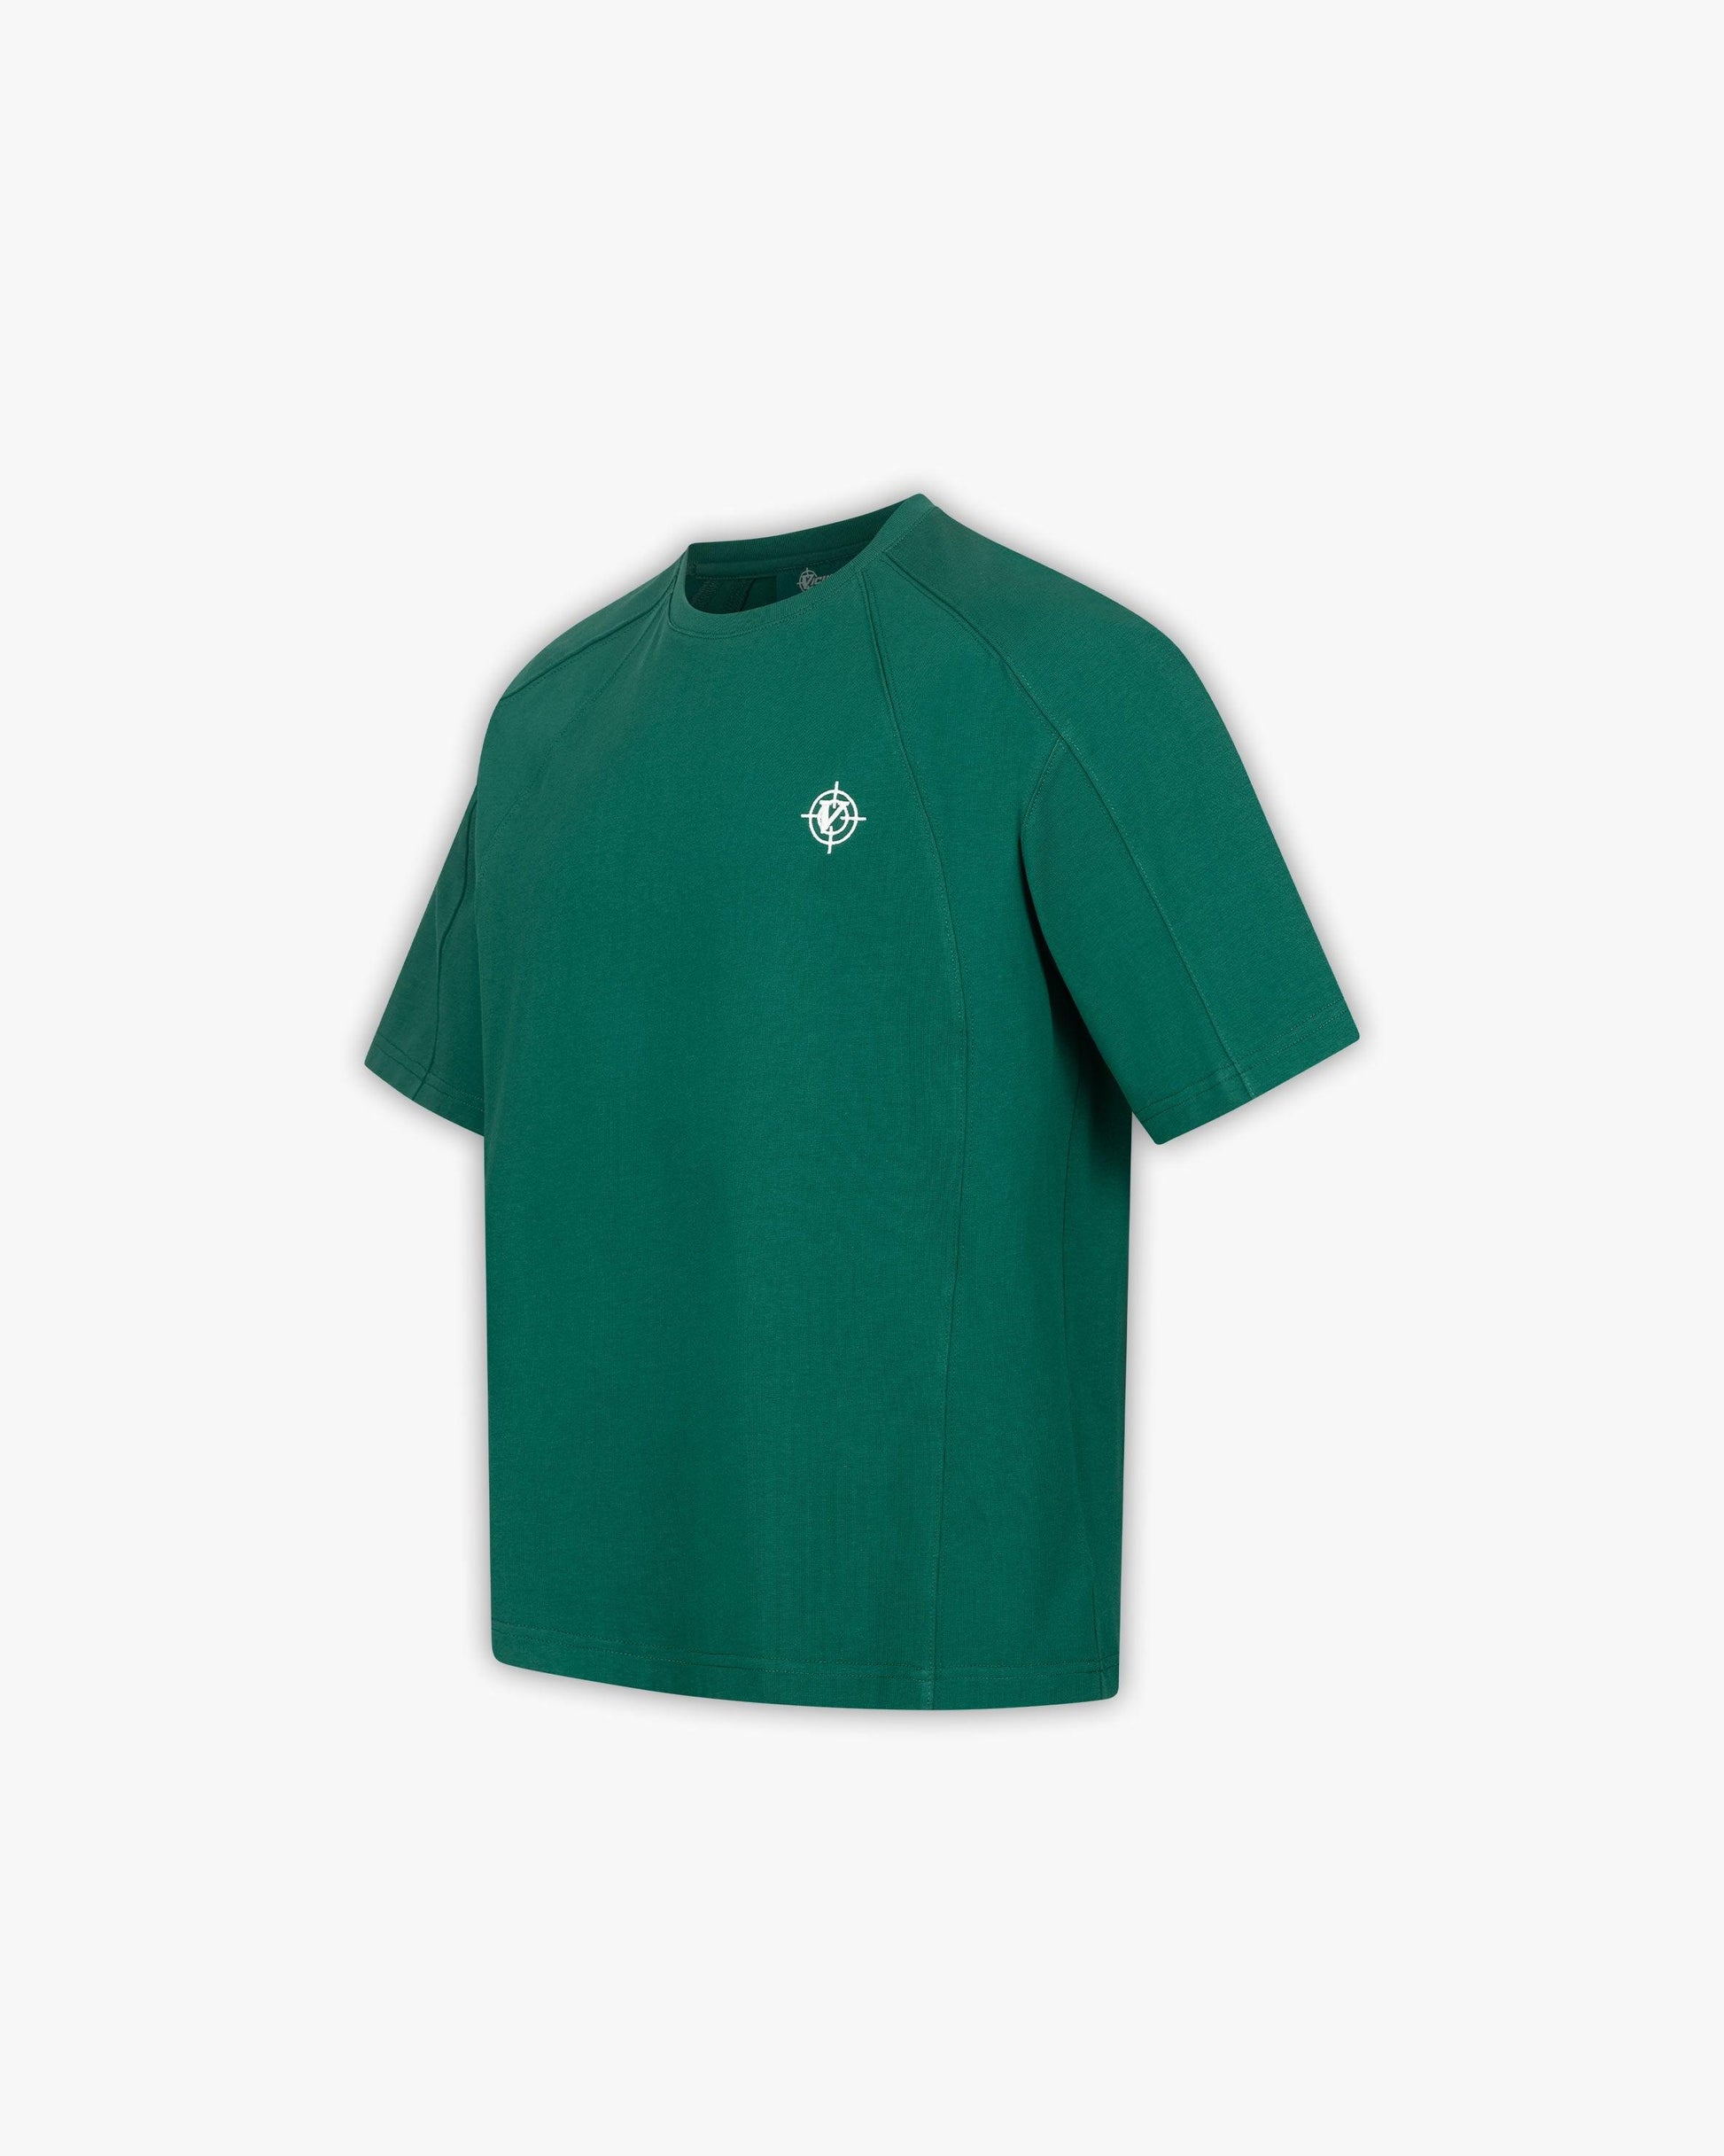 T-SHIRT FORREST GREEN - VICINITY